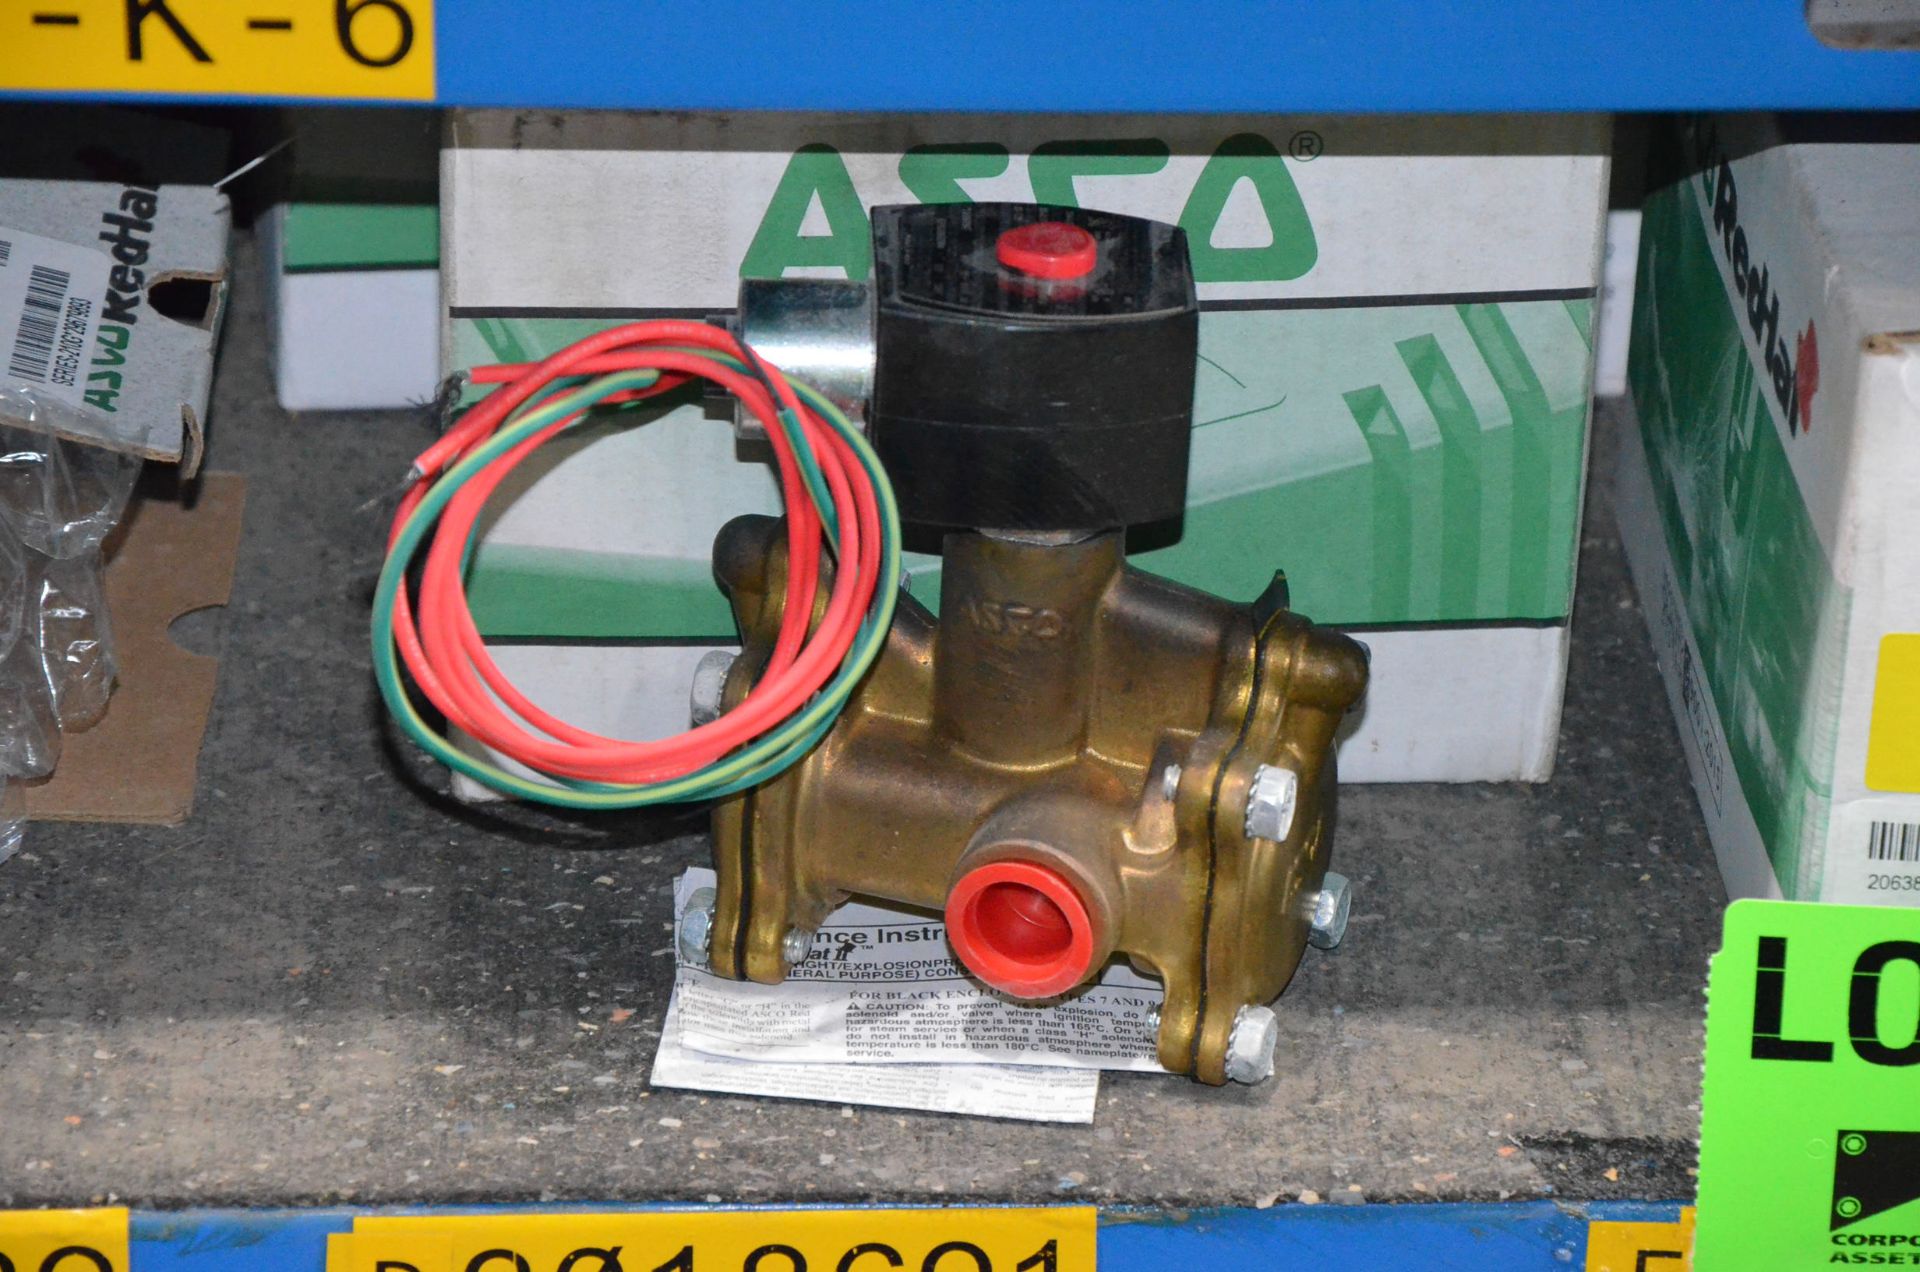 LOT/ CONTENTS OF SHELF - 3-WAY BRASS SOLENOID VALVES - Image 2 of 4